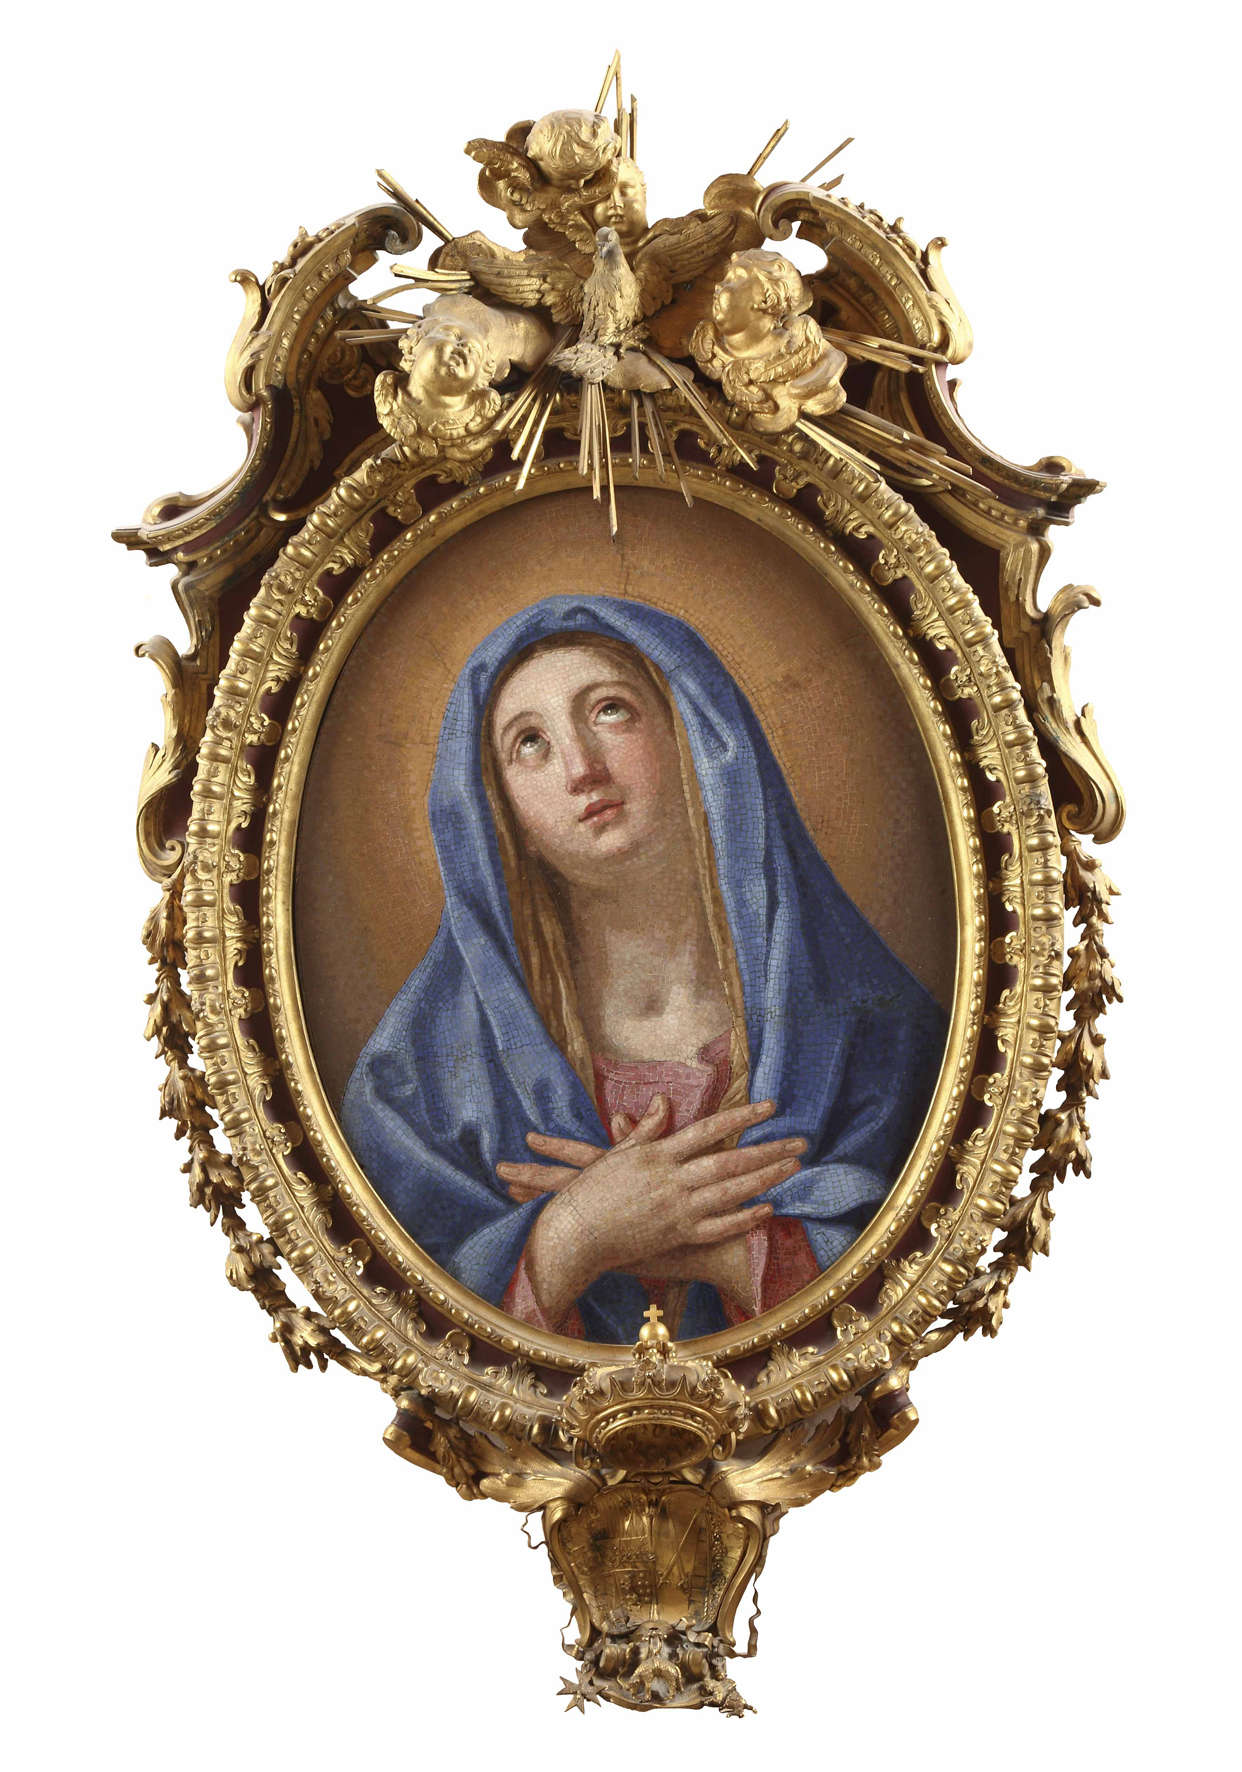 Pietro Paolo Cristofari, The Virgin Mary (1738; mosaic, 65 x 50 cm; Madrid, Gallery of the Royal Collections)